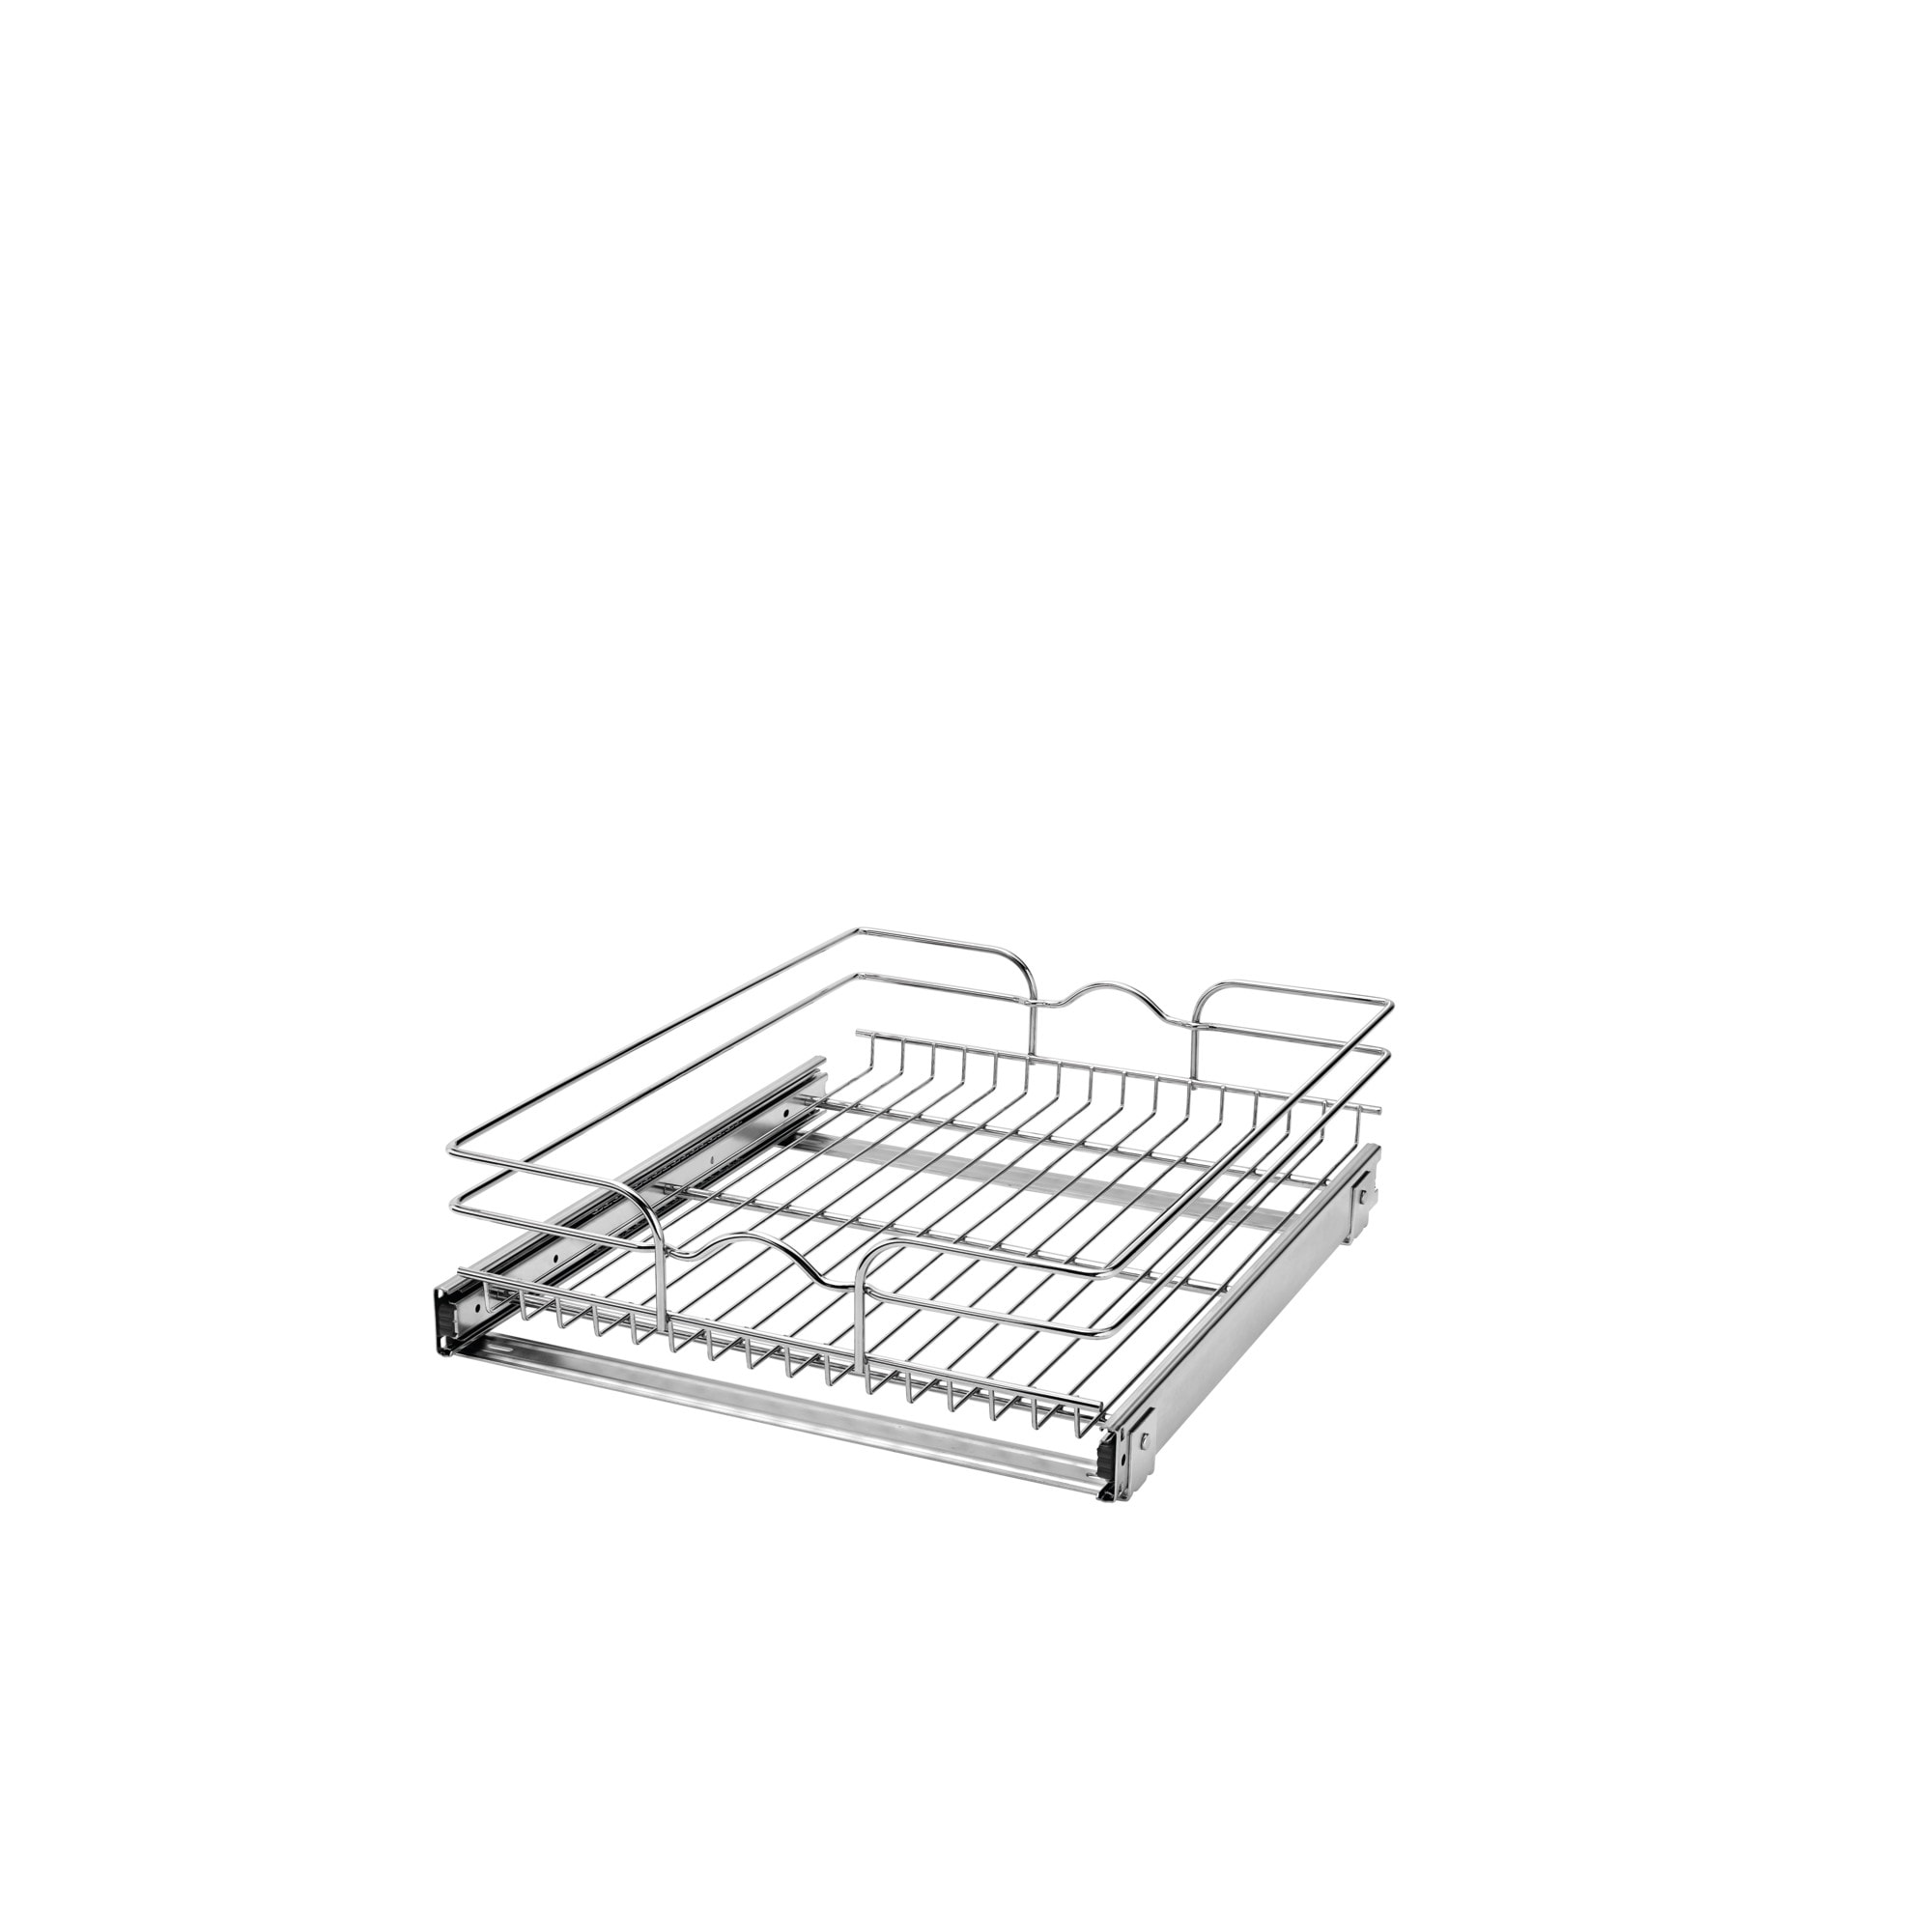 Home Zone Living 17 inchw Steel Mesh Basket Under Shelf Cabinet Pull Out, Size: 17W, Black